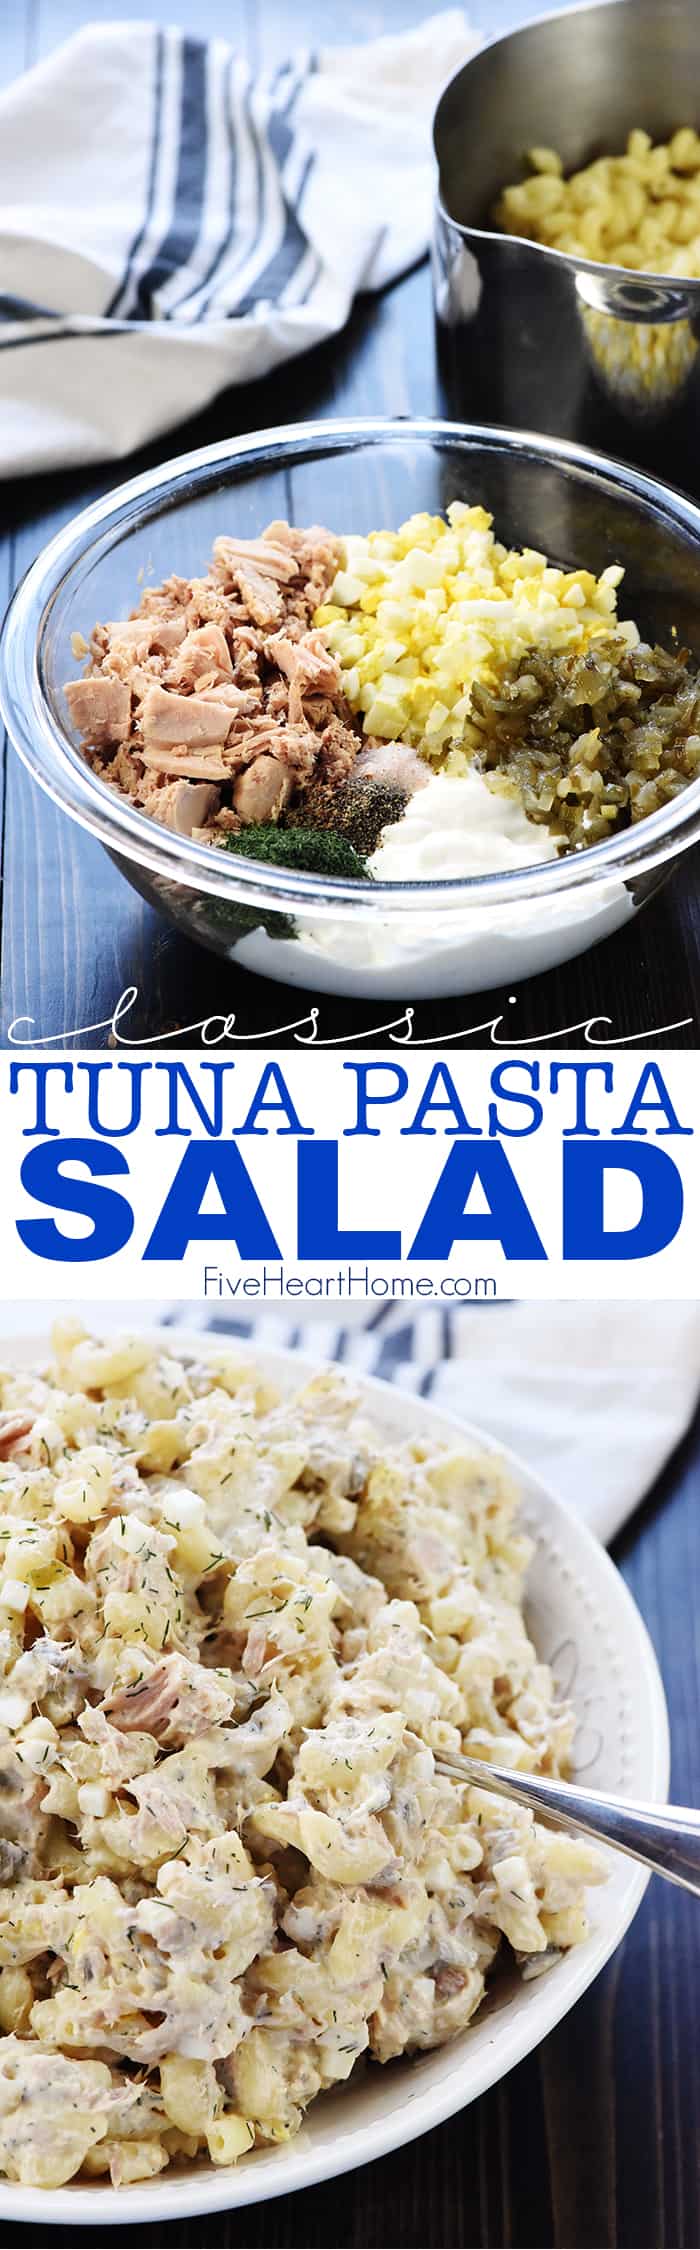 Tuna Pasta Salad features whole wheat macaroni, hard-boiled eggs, both sweet and dill pickles, and fresh dill in a lightened-up dressing of mayonnaise and Greek yogurt! | FiveHeartHome.com via @fivehearthome